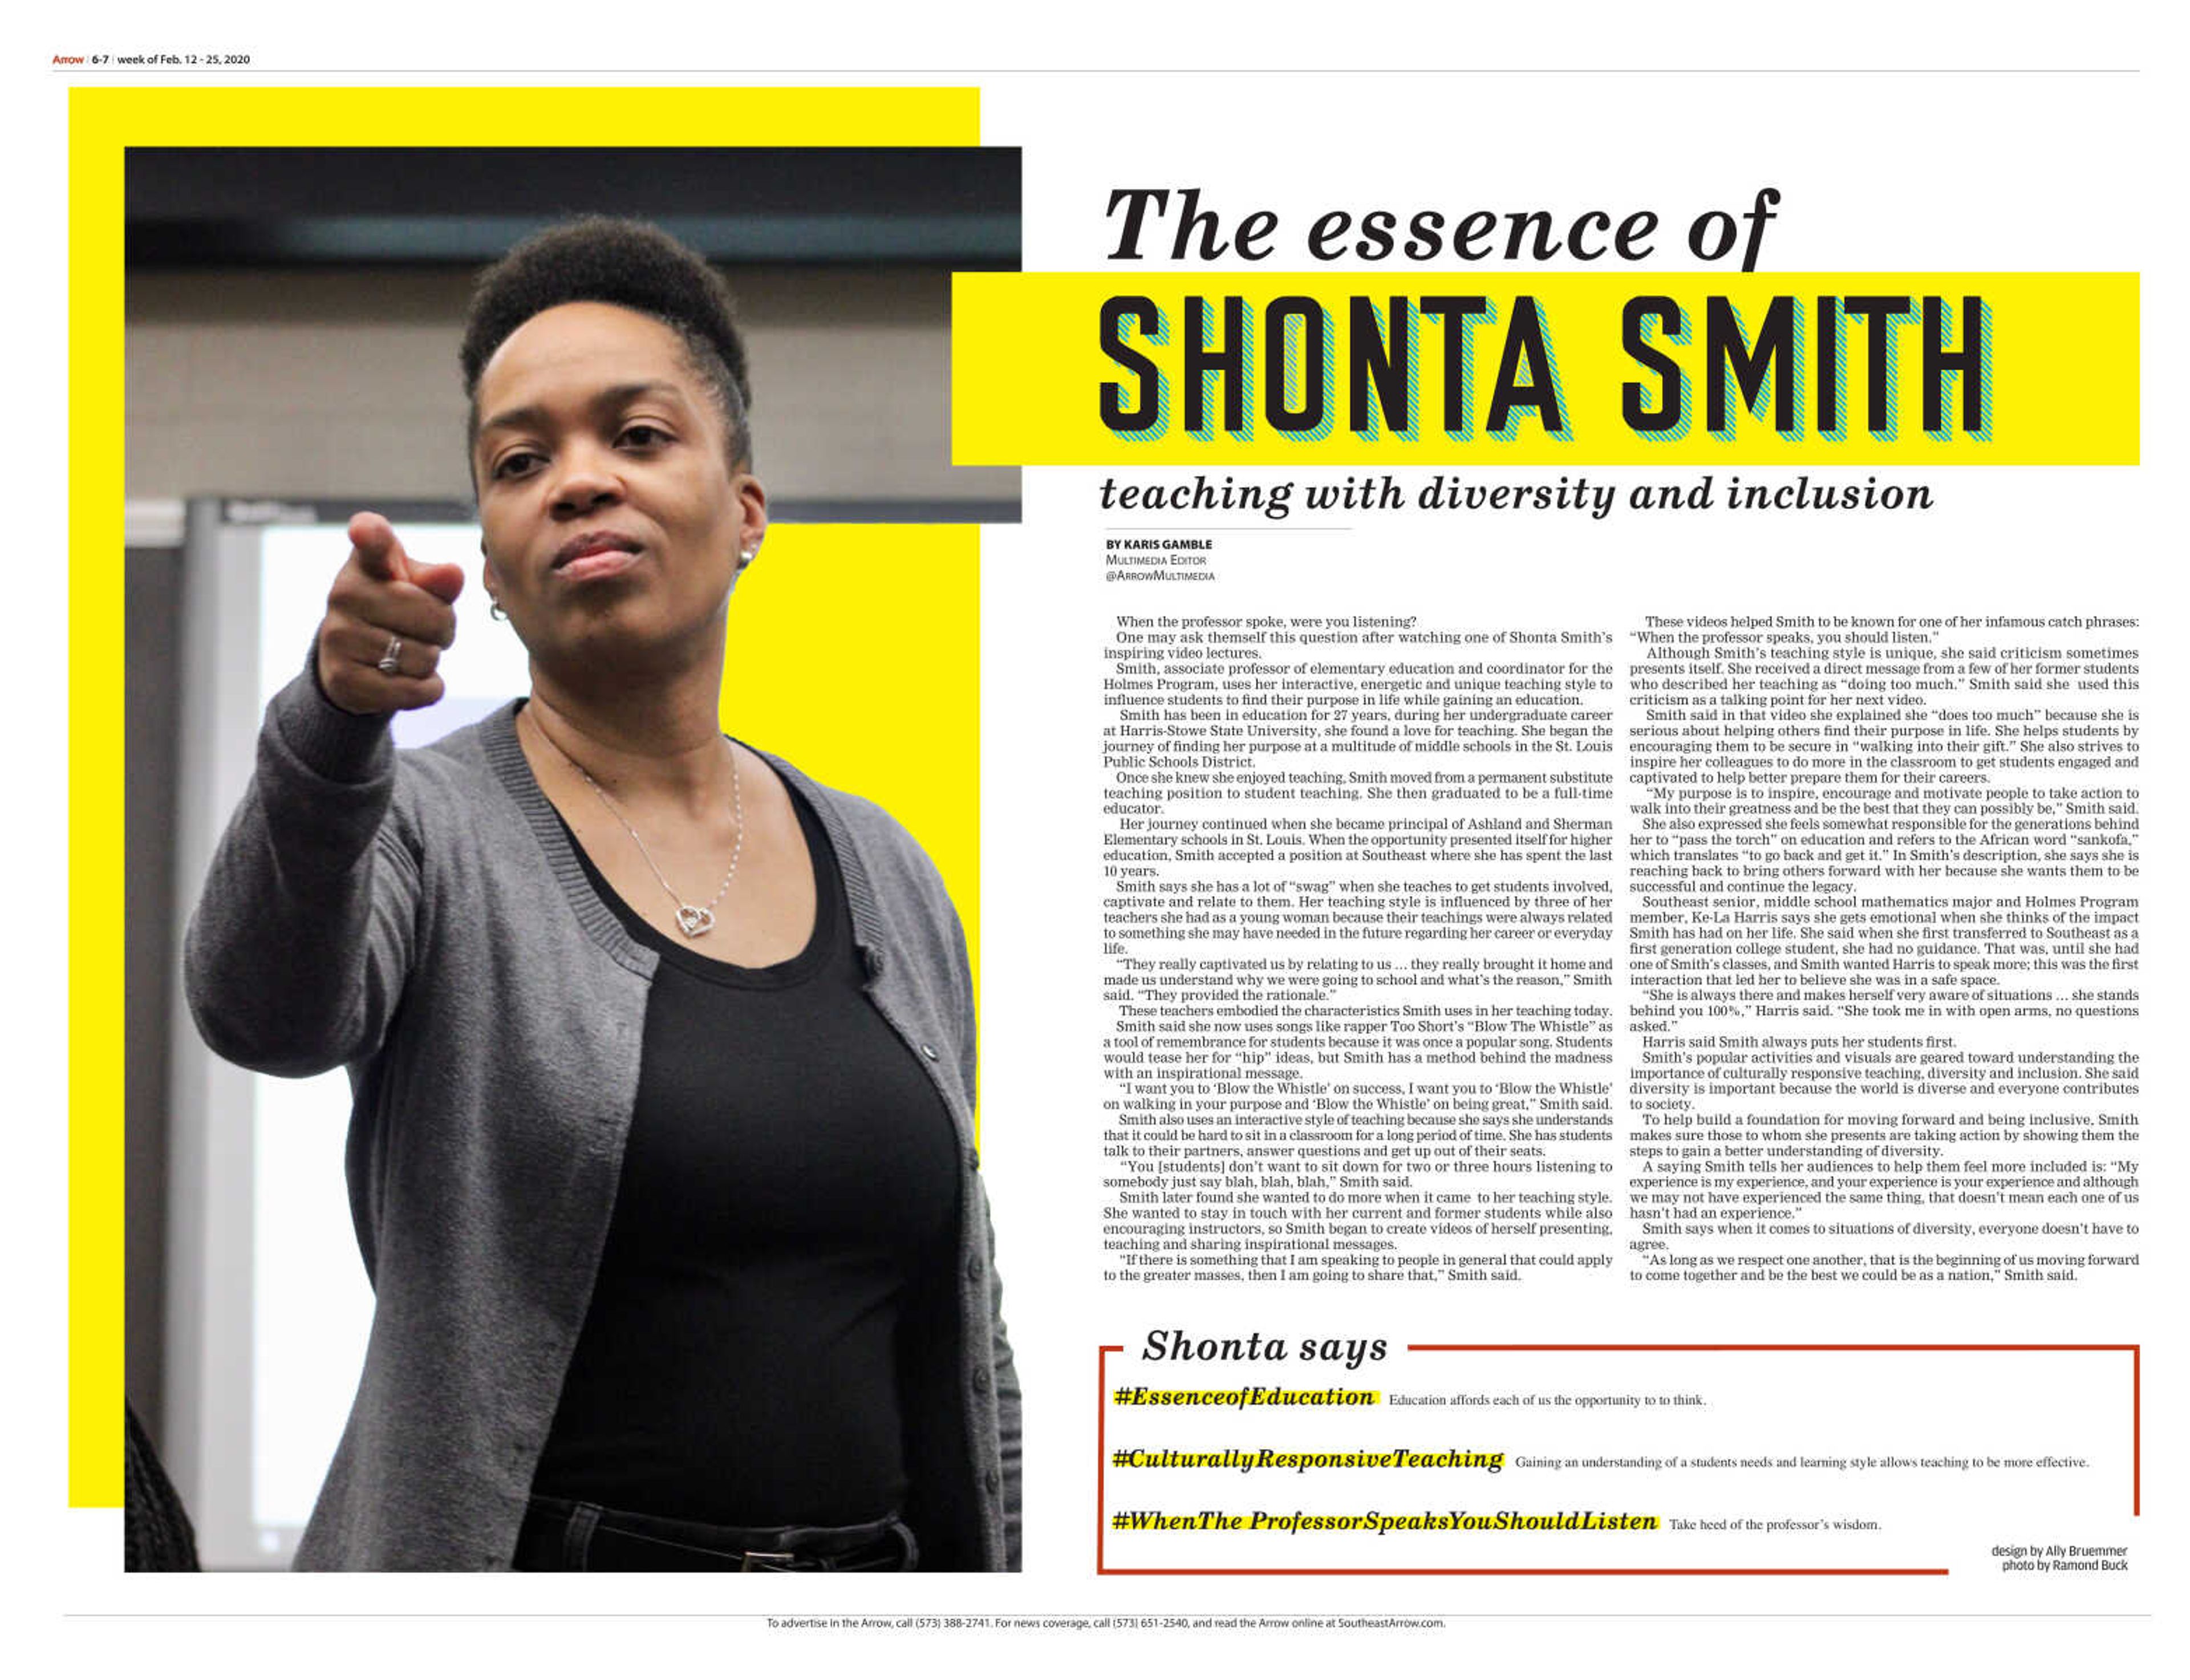 The essence of Shonta Smith: teaching with diversity and inclusion